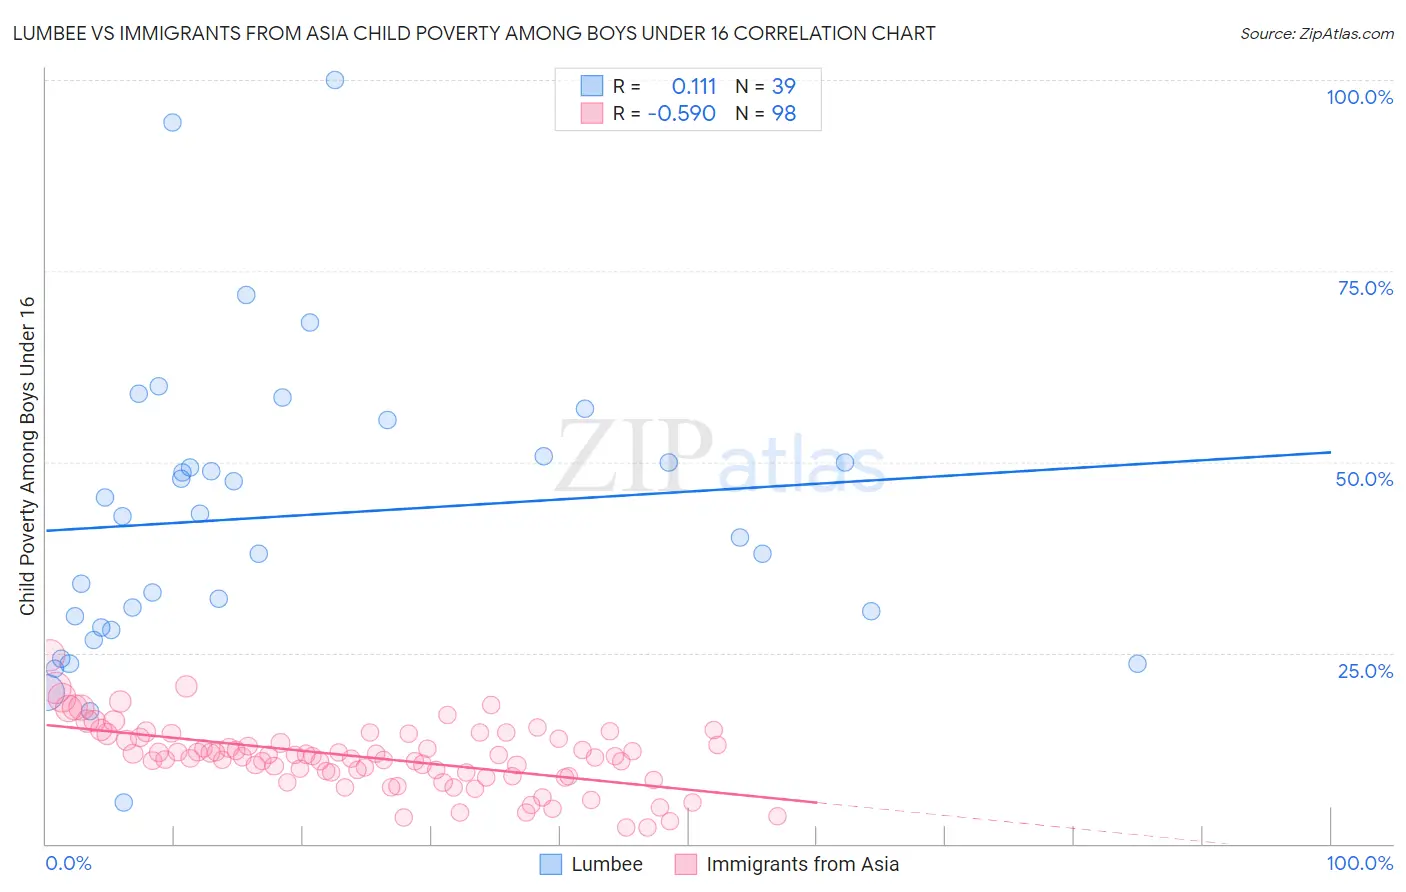 Lumbee vs Immigrants from Asia Child Poverty Among Boys Under 16